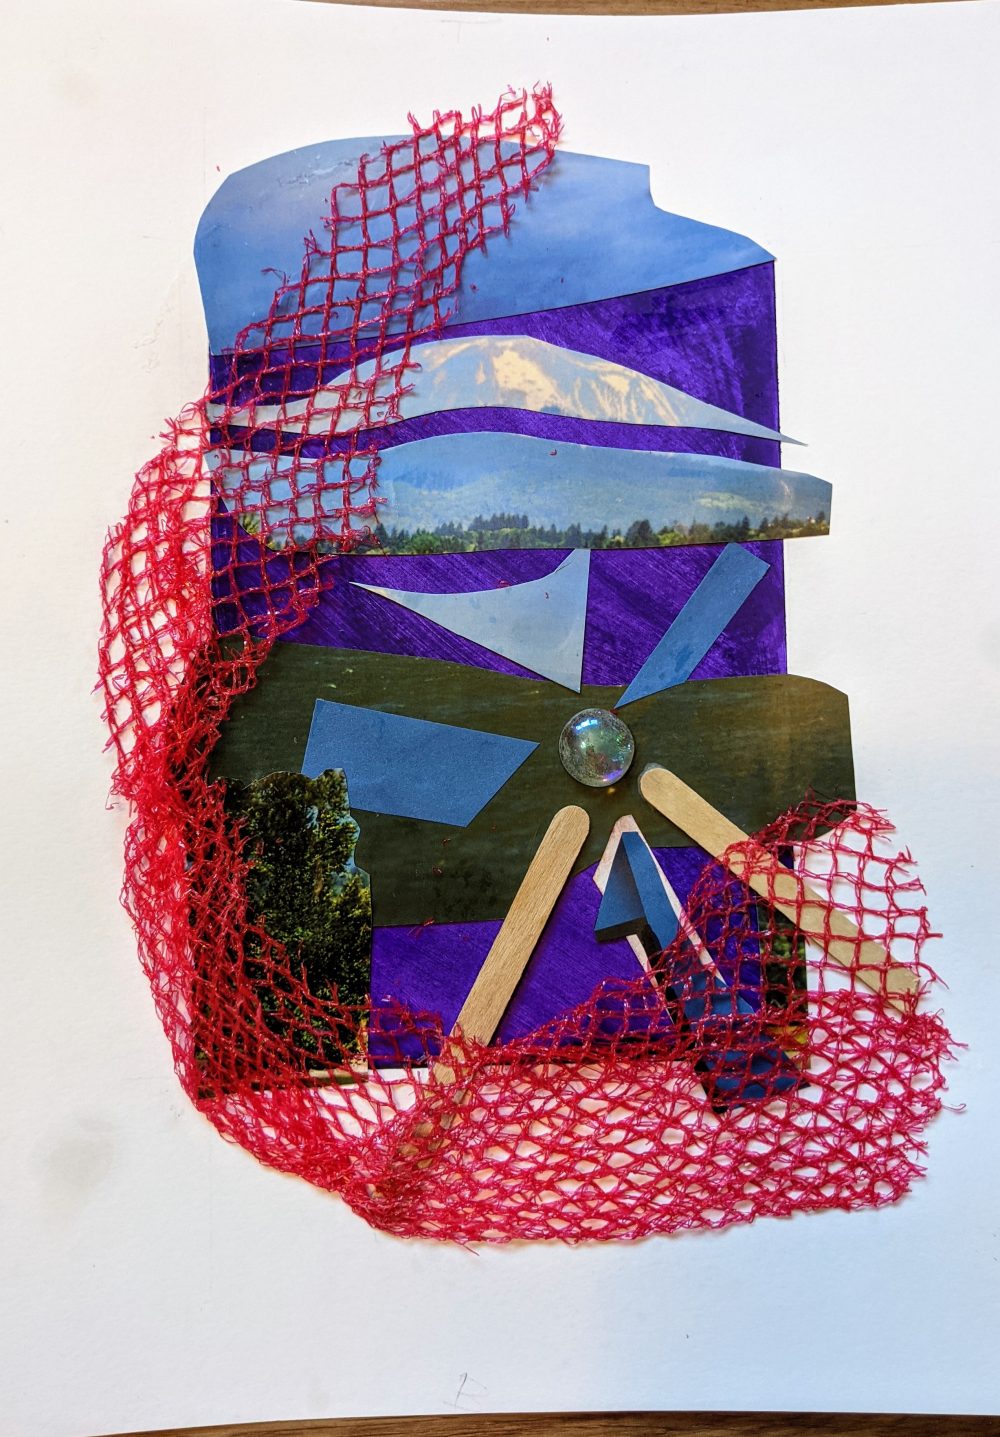 A collage with paper, netting, stone, and sticks.